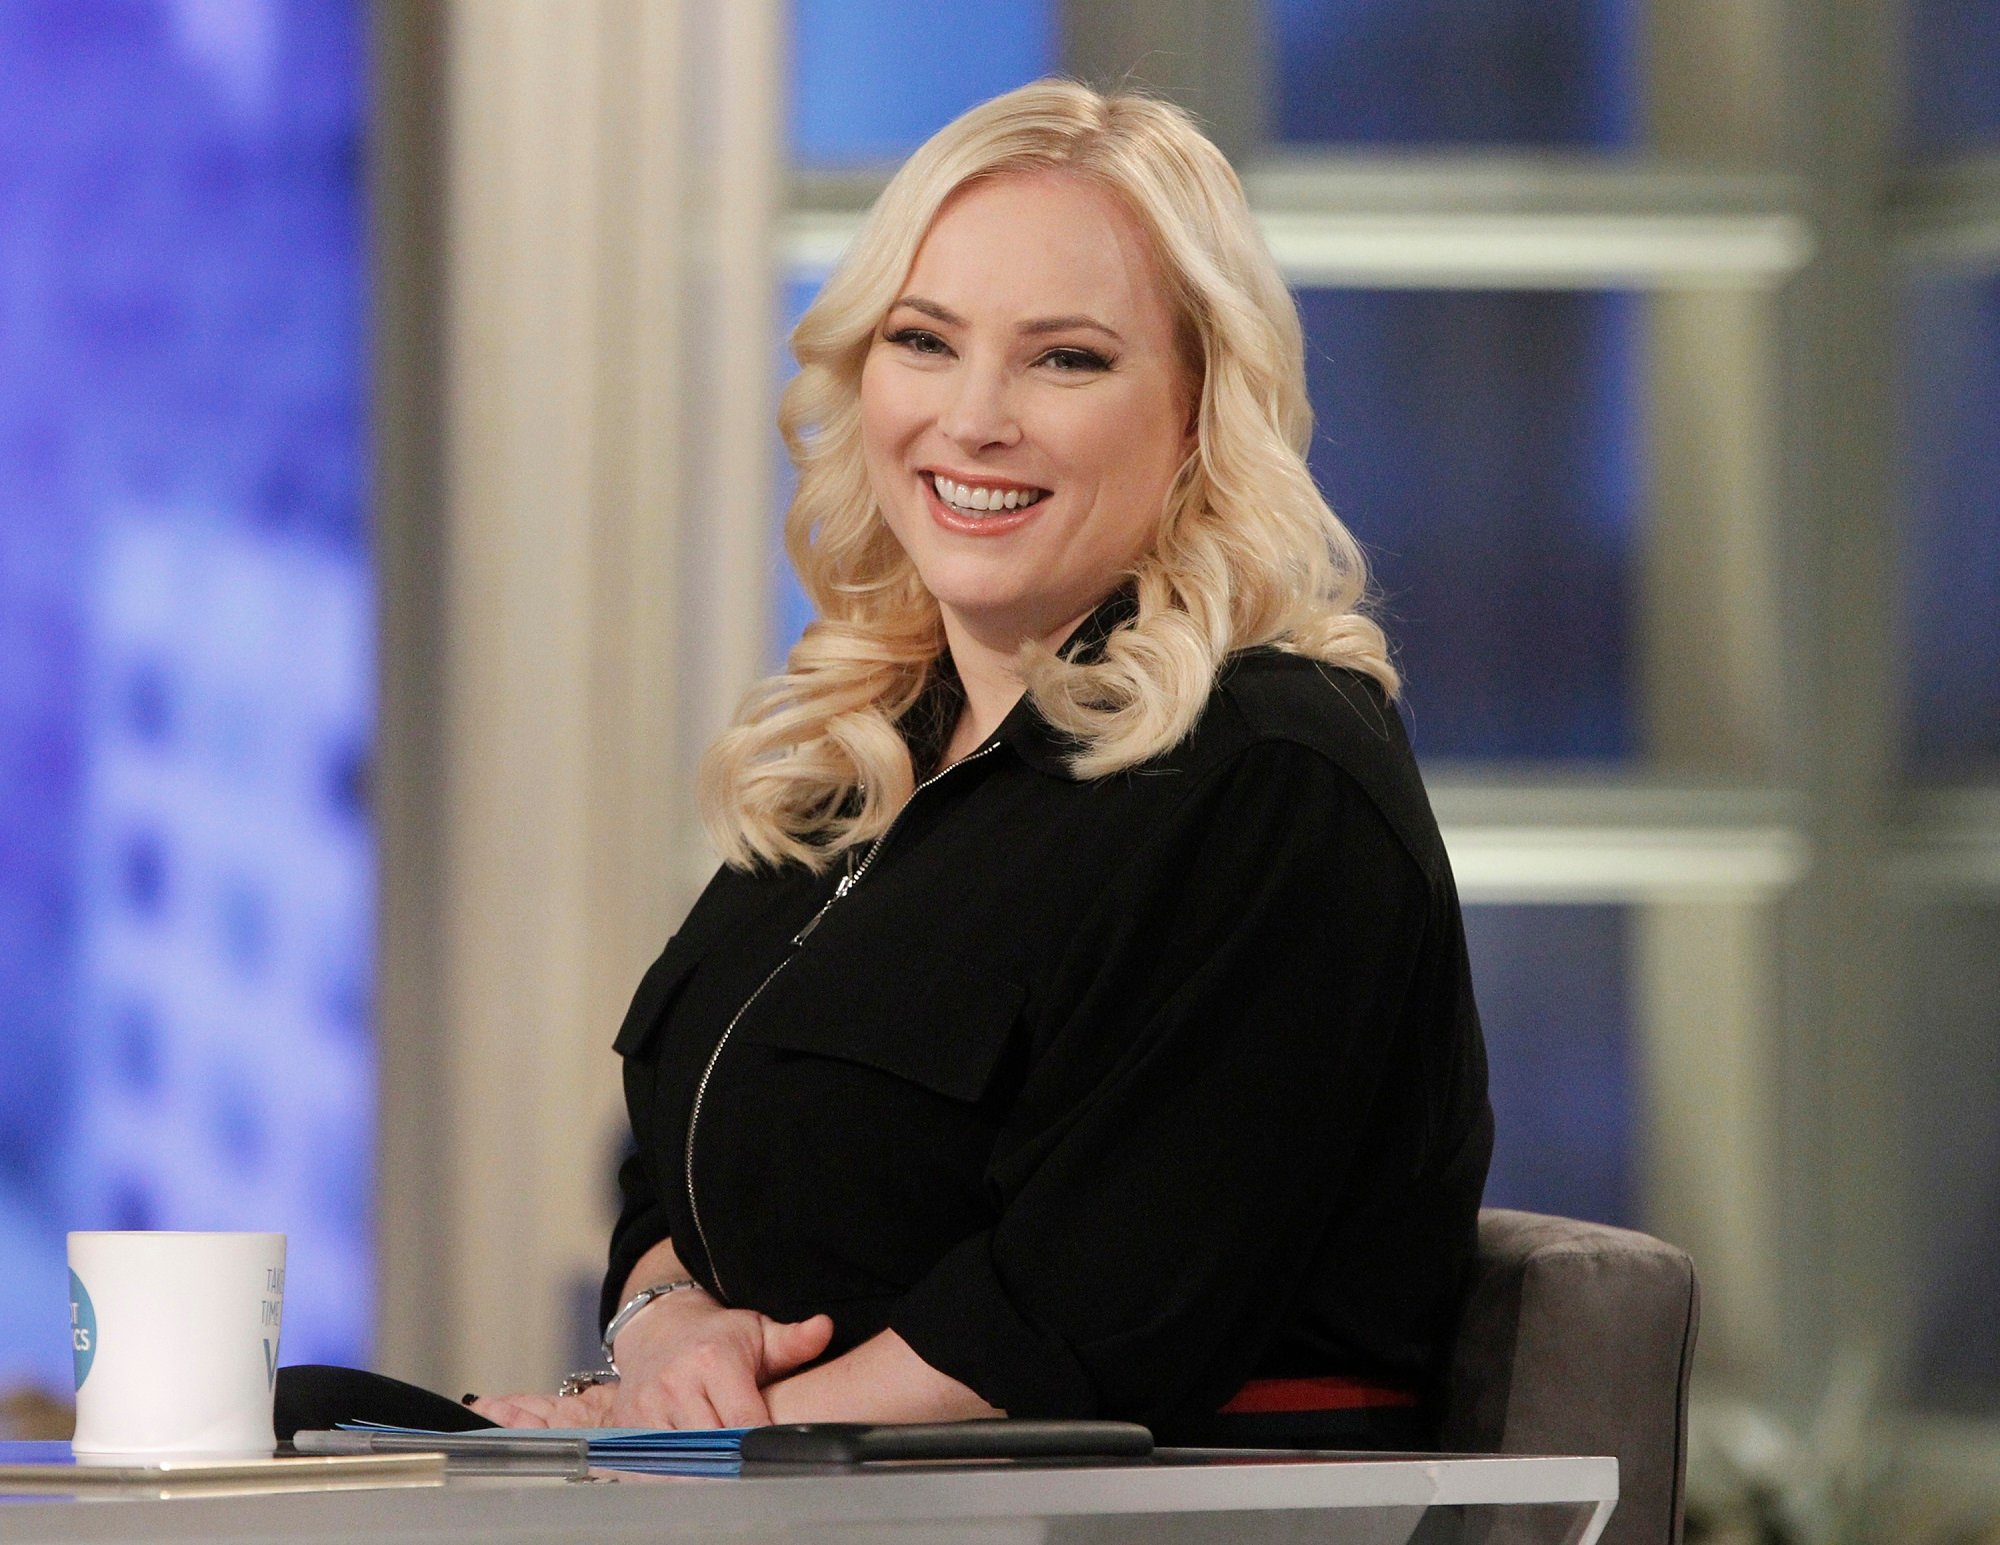 ‘The View’: What Is Meghan McCain Doing in 2022, Since Leaving the Show?